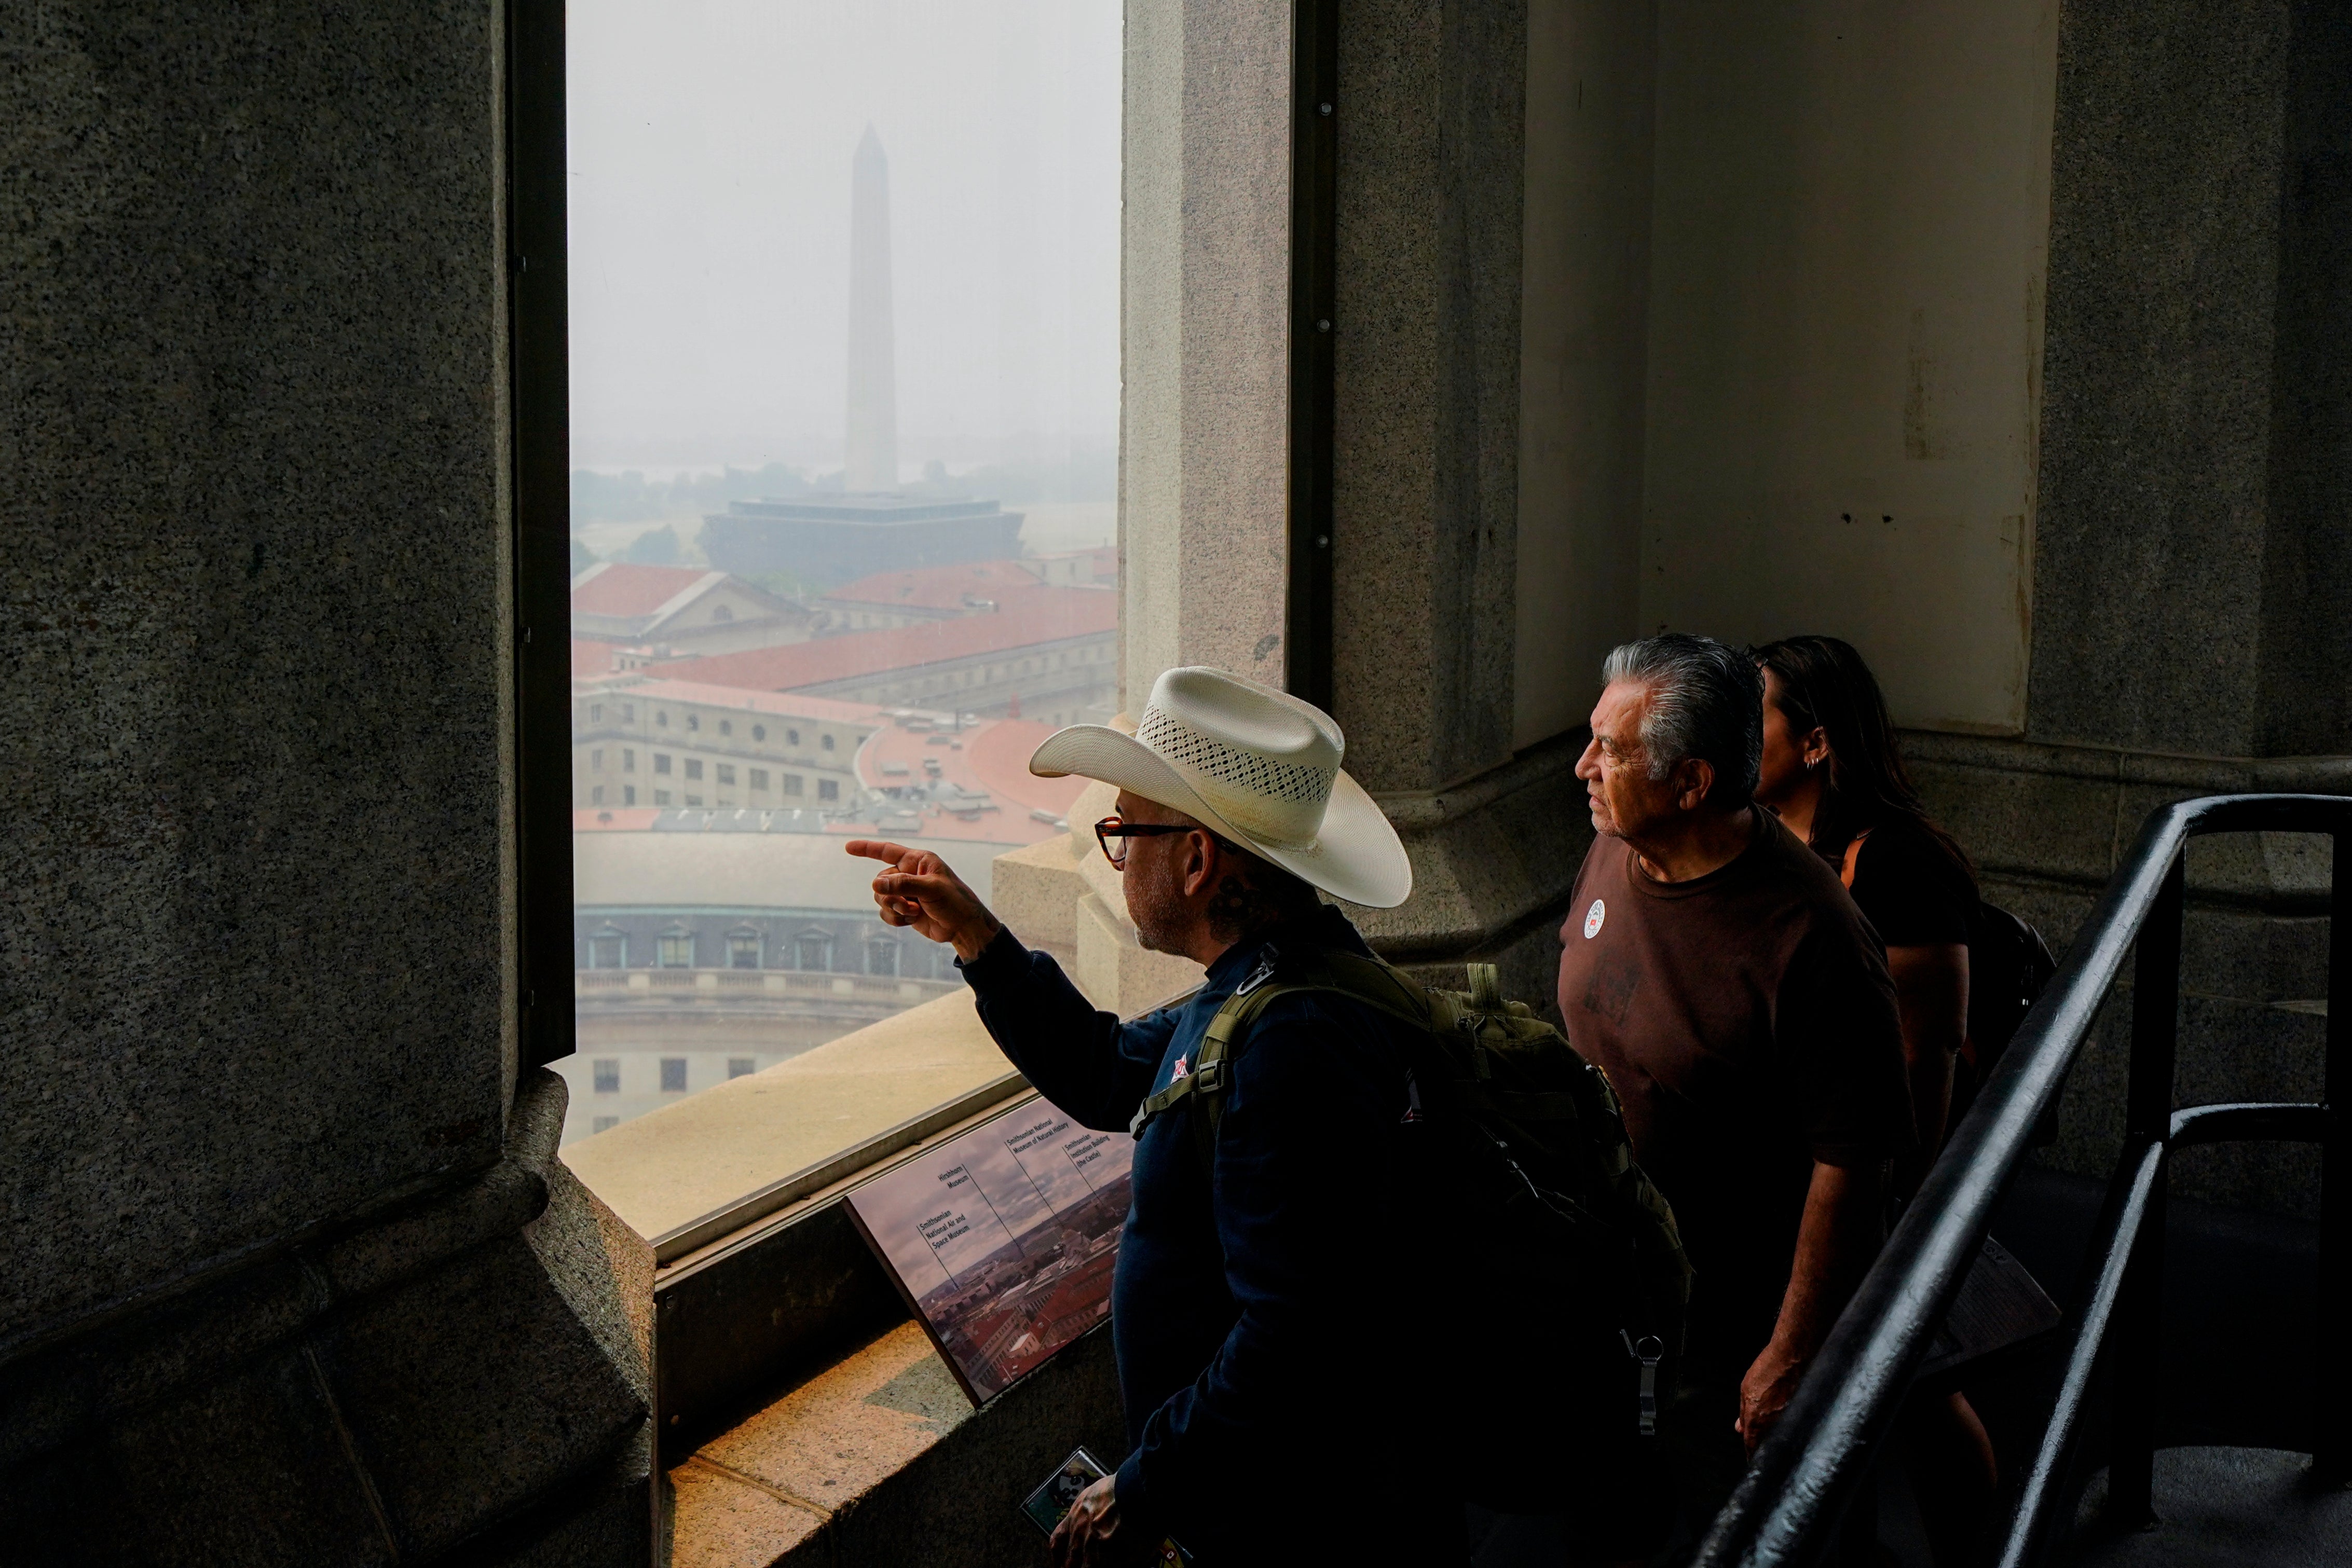 People tour the top of the Old Post Office Tower as haze from a blanket of smoke covers the view on Thursday in Washington DC